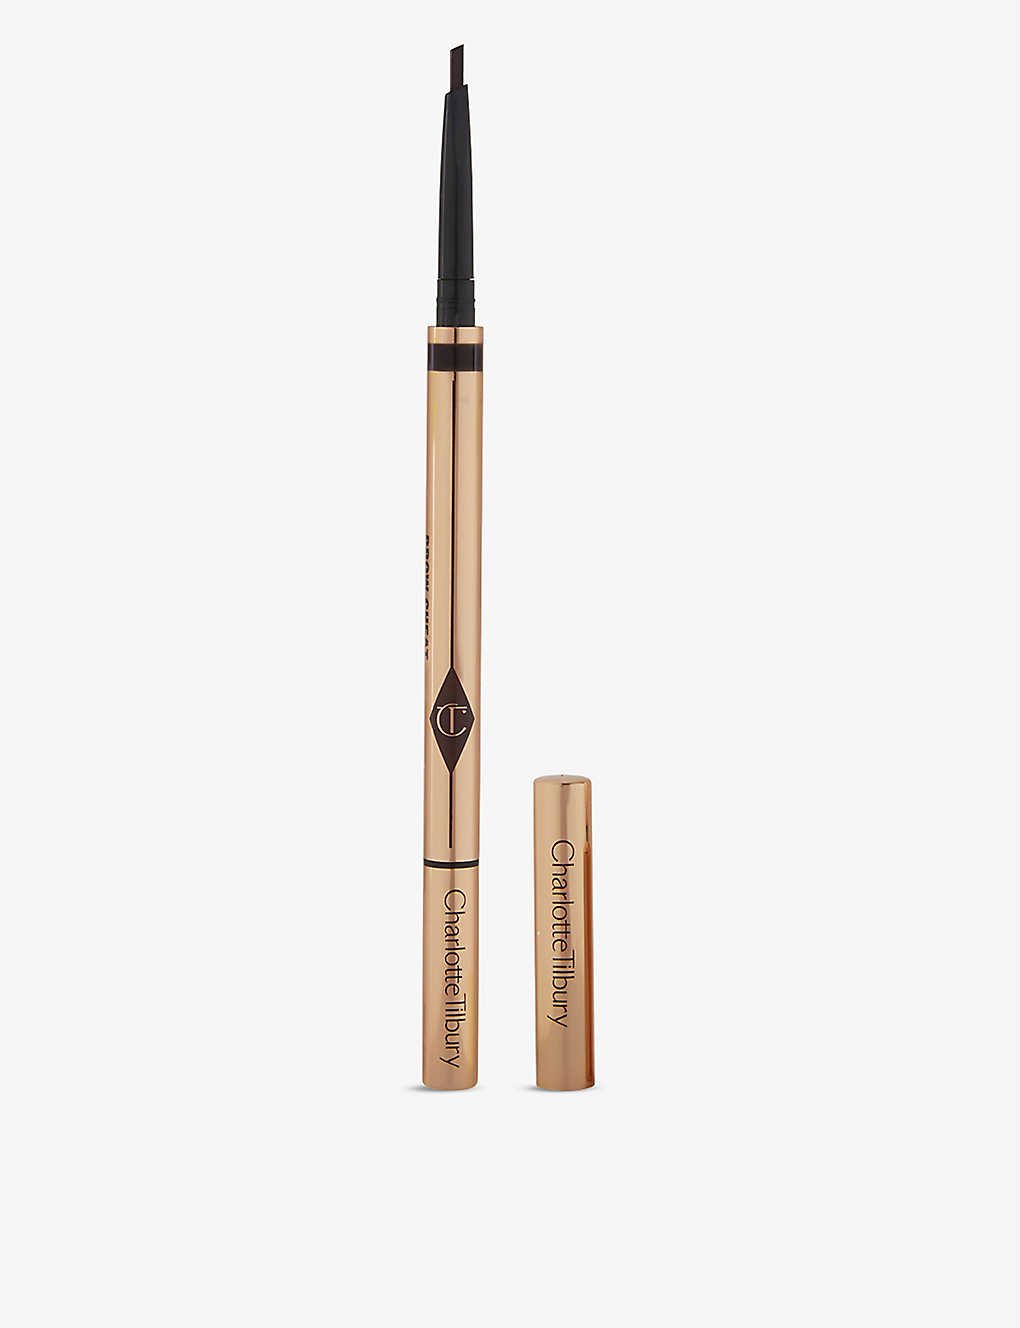 Charlotte Tilbury Brow Cheat Refillable Eyebrow Pencil 0.1g In Black Brown